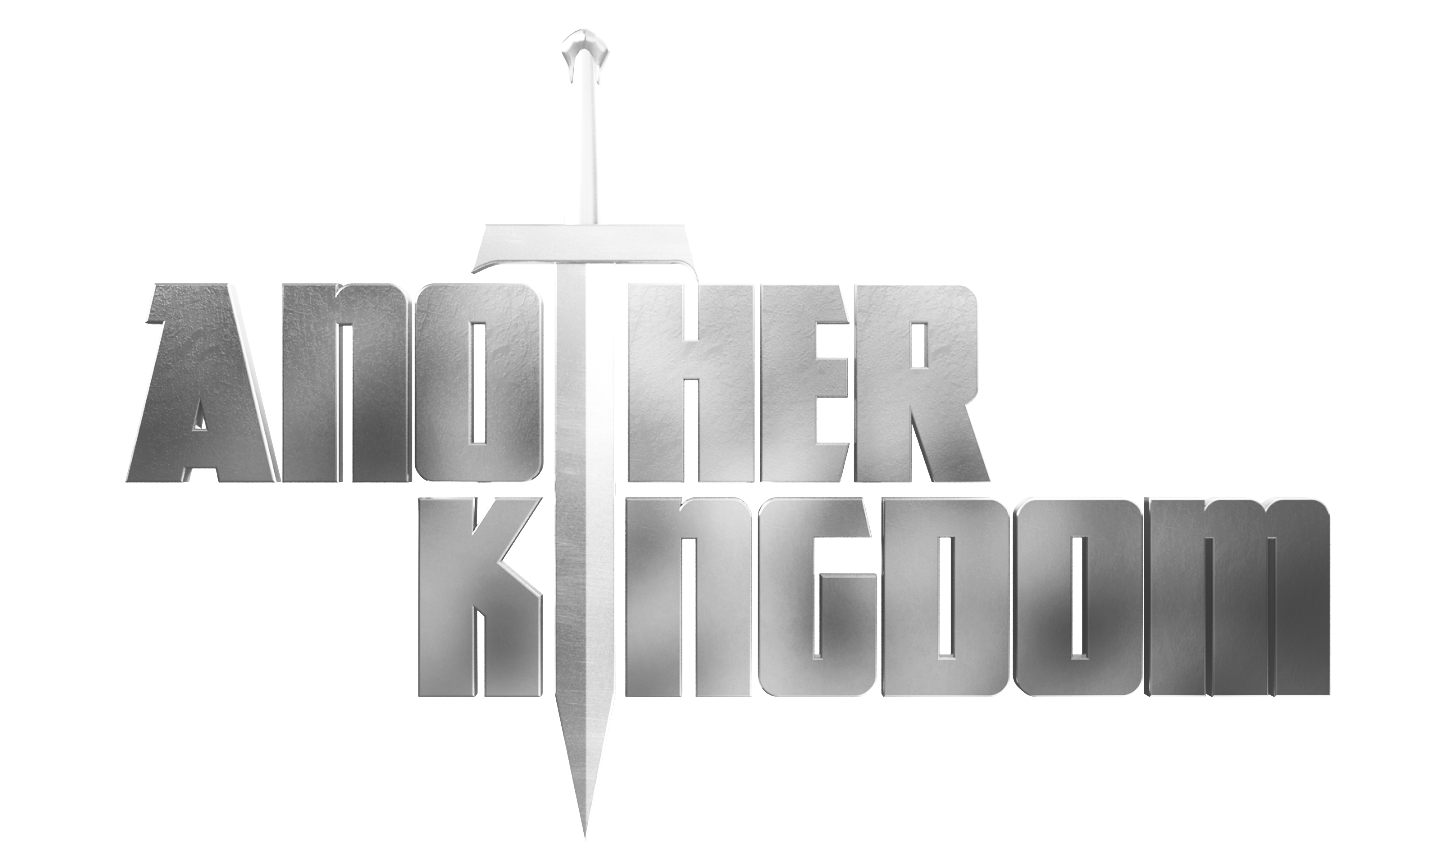 Another Kingdom